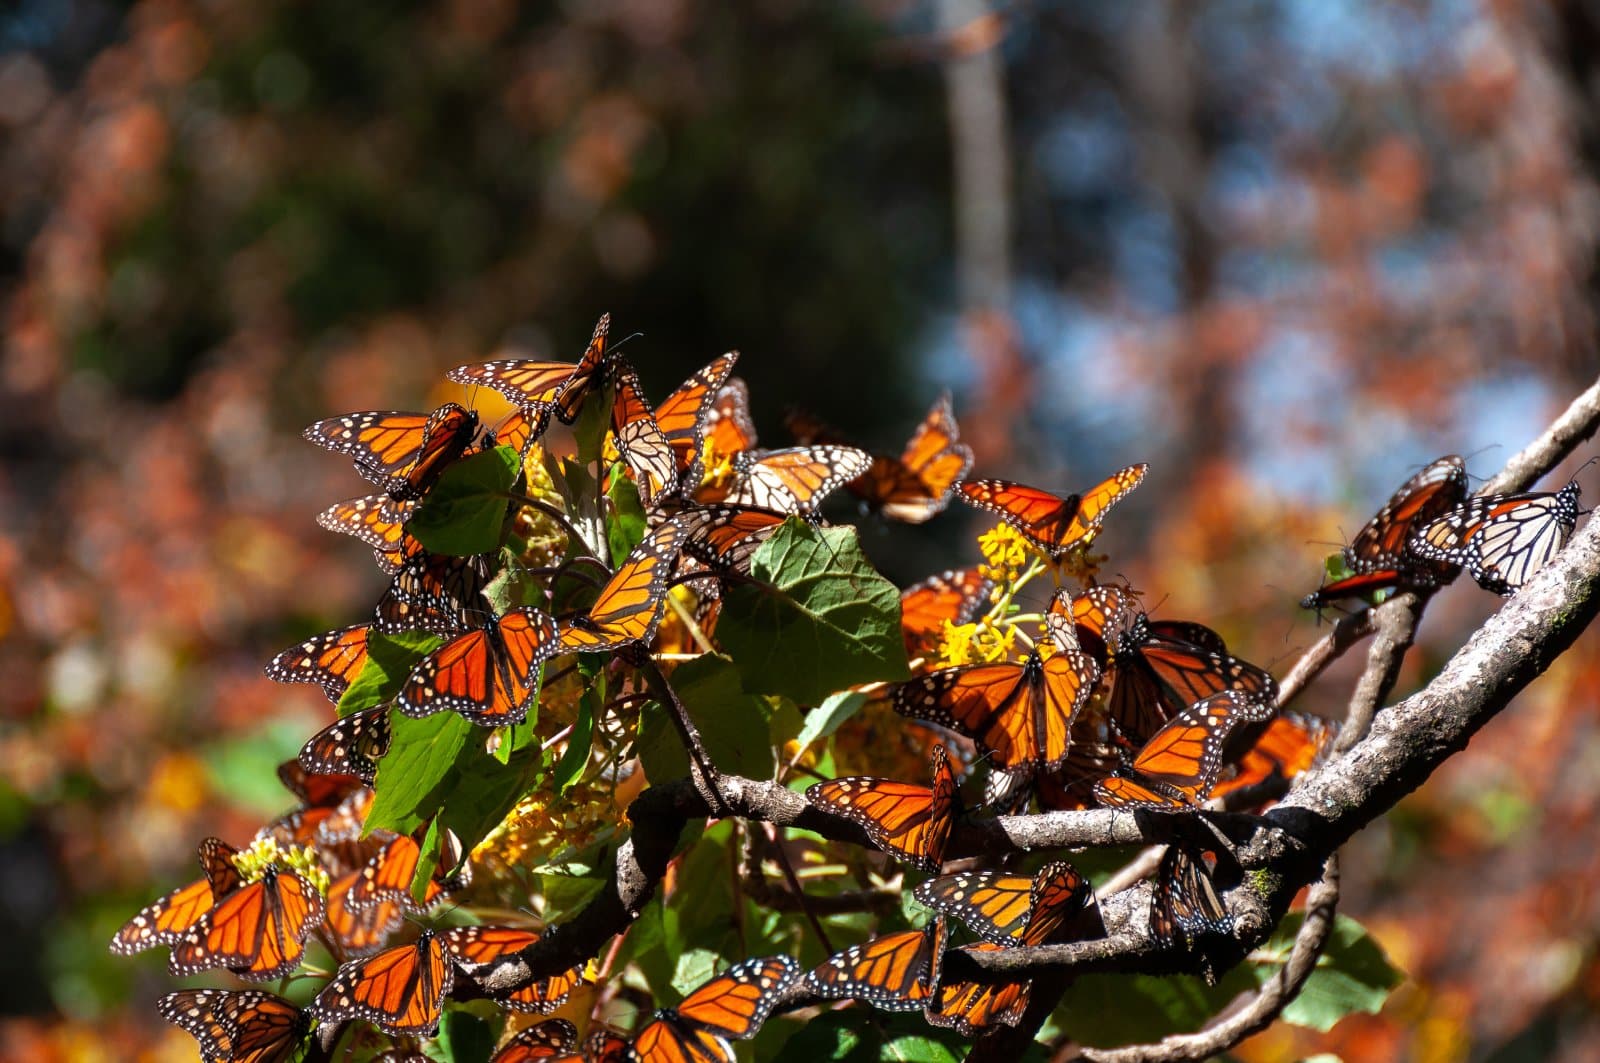 <p class="wp-caption-text">Image Credit: Shutterstock / Noradoa</p>  <p><span>Each year, millions of monarch butterflies migrate from North America to the forests of Michoacán and the State of Mexico, creating one of nature’s most spectacular displays. The Monarch Butterfly Biosphere Reserve, a UNESCO World Heritage site, offers visitors the chance to witness this incredible phenomenon up close, as the forests come alive with the vibrant orange and black of the monarch wings.</span></p>